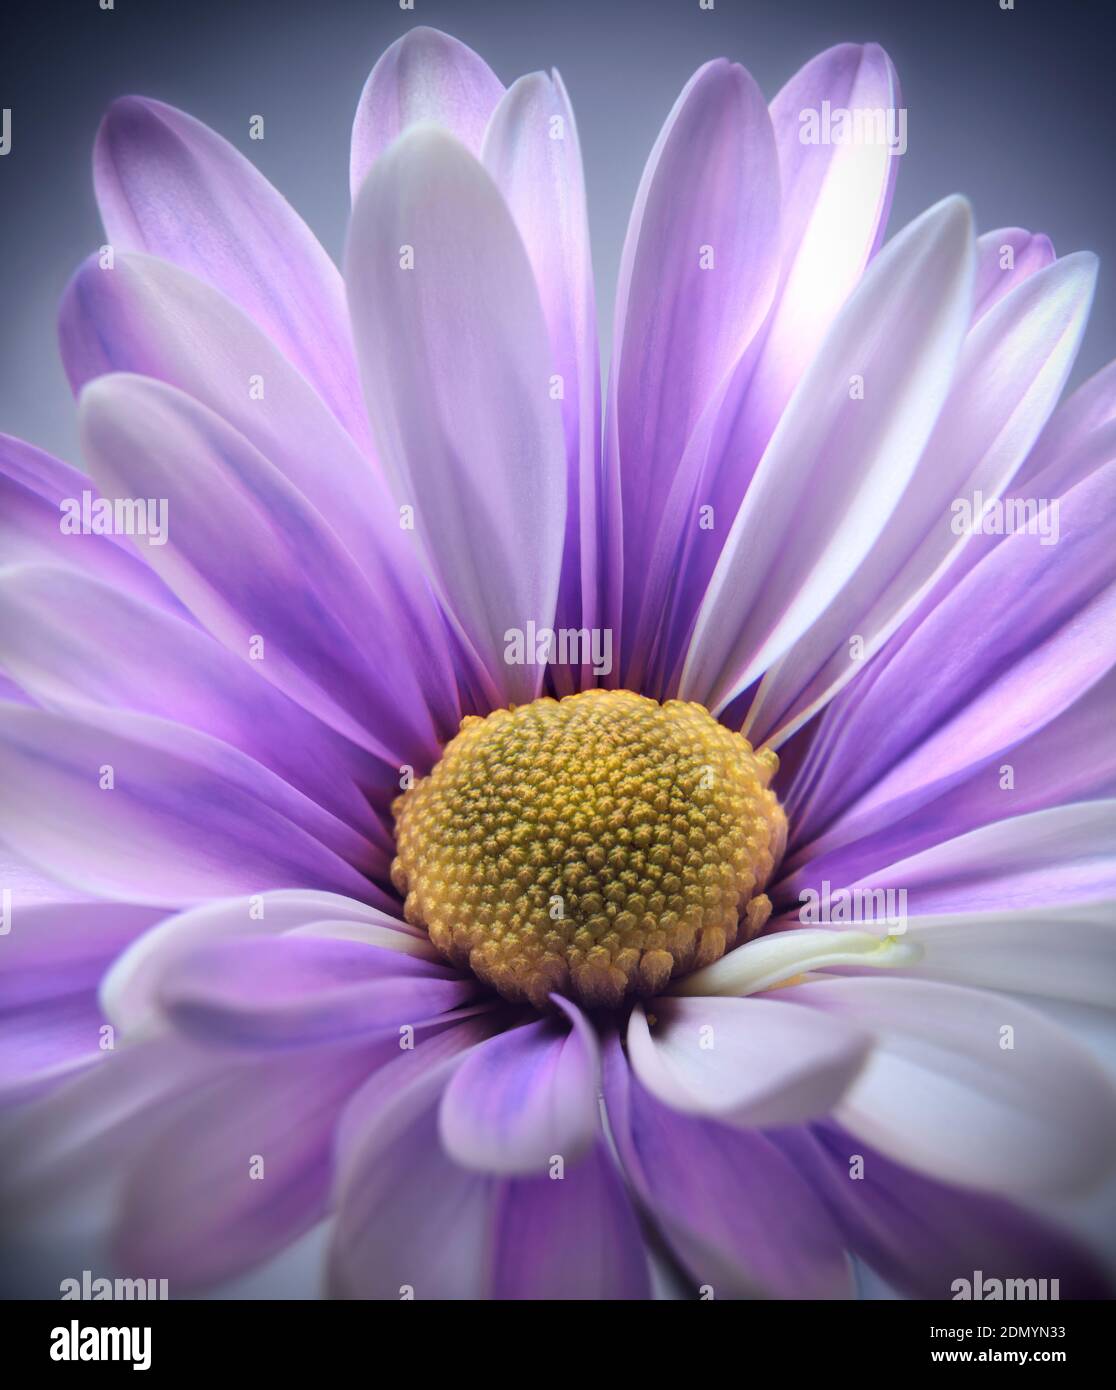 Close up photograph of purple daisy gerbera flower showing the stamen and petals Stock Photo